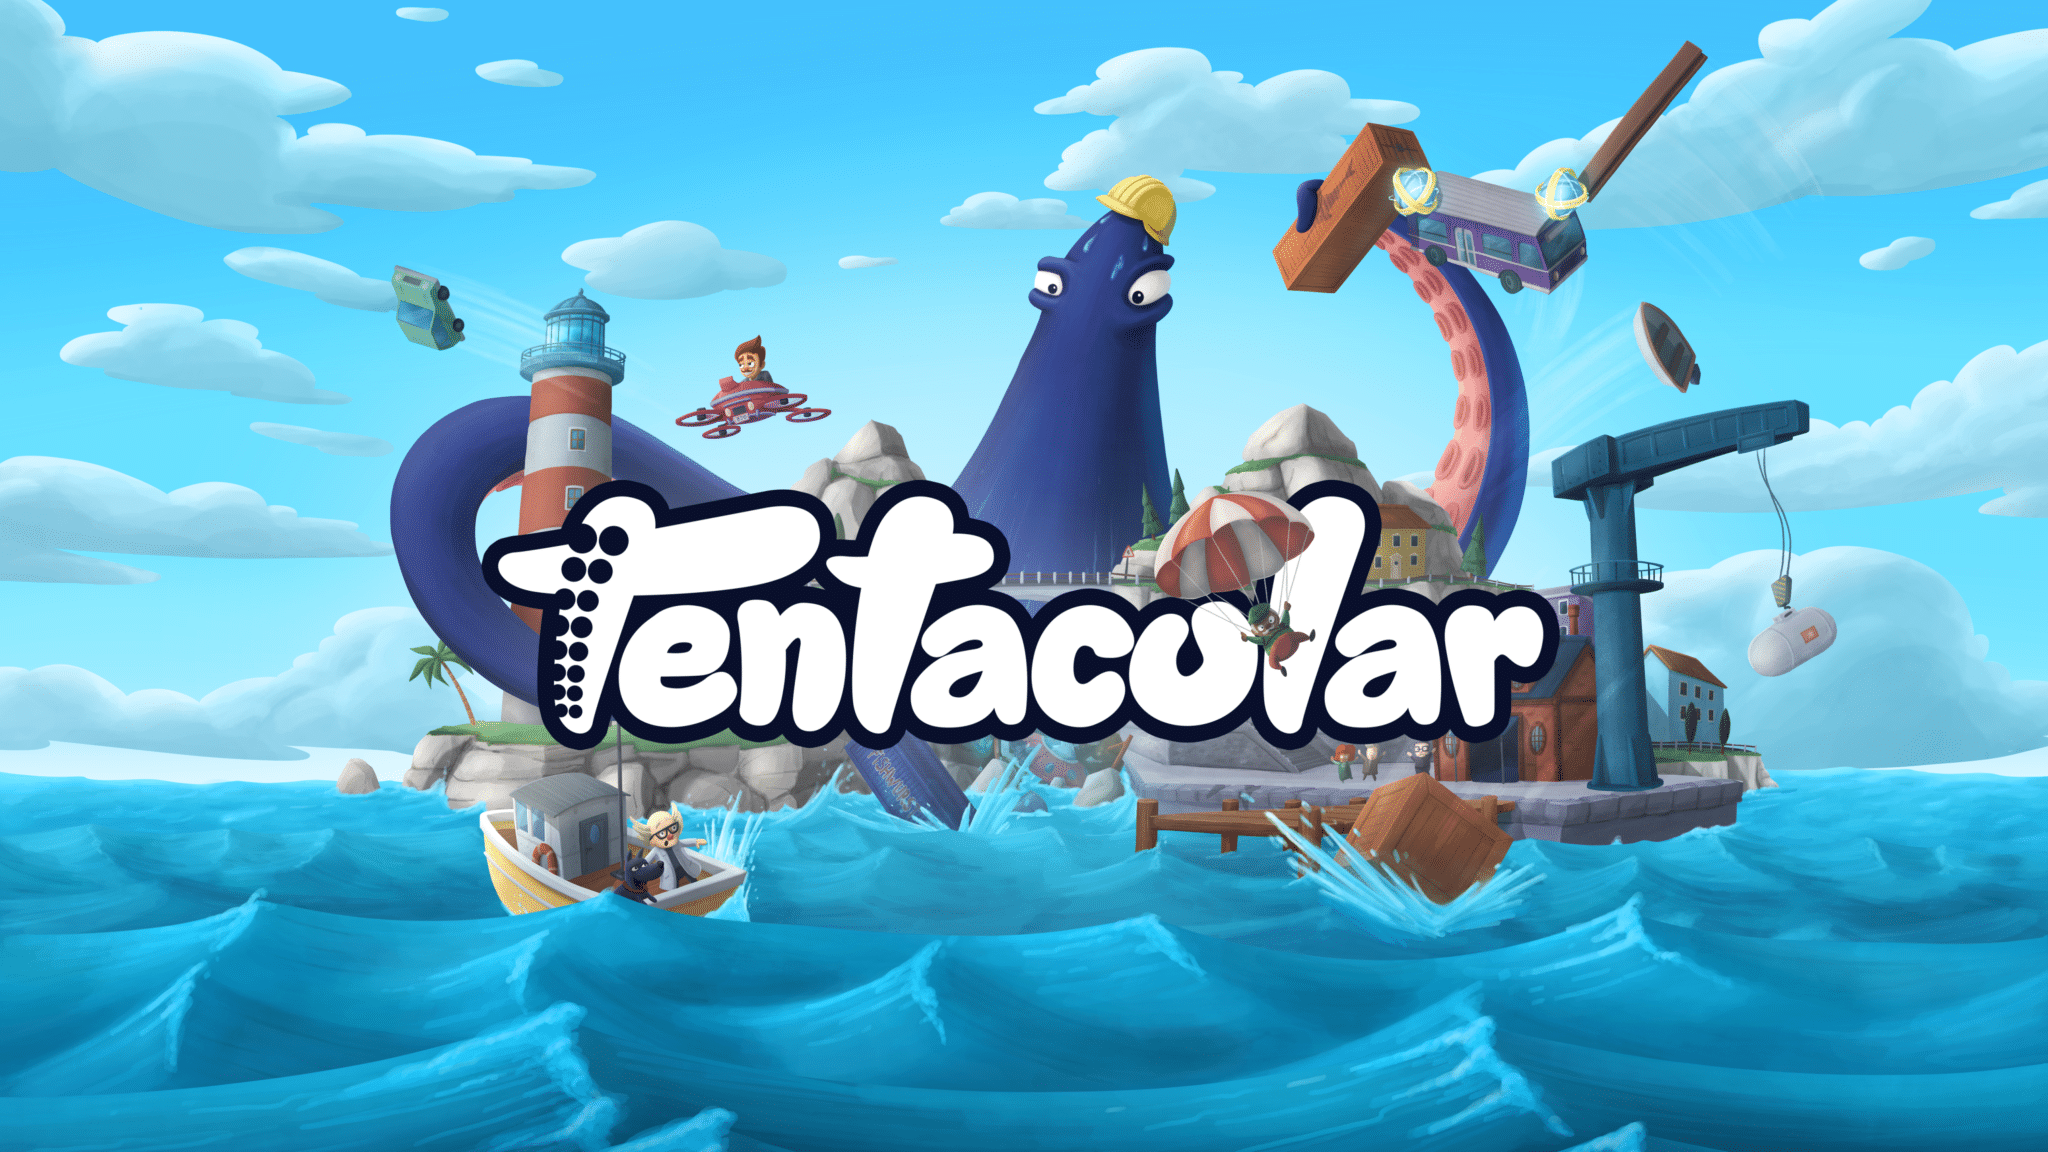 Tentacular: The Gold Standard of VR Gaming